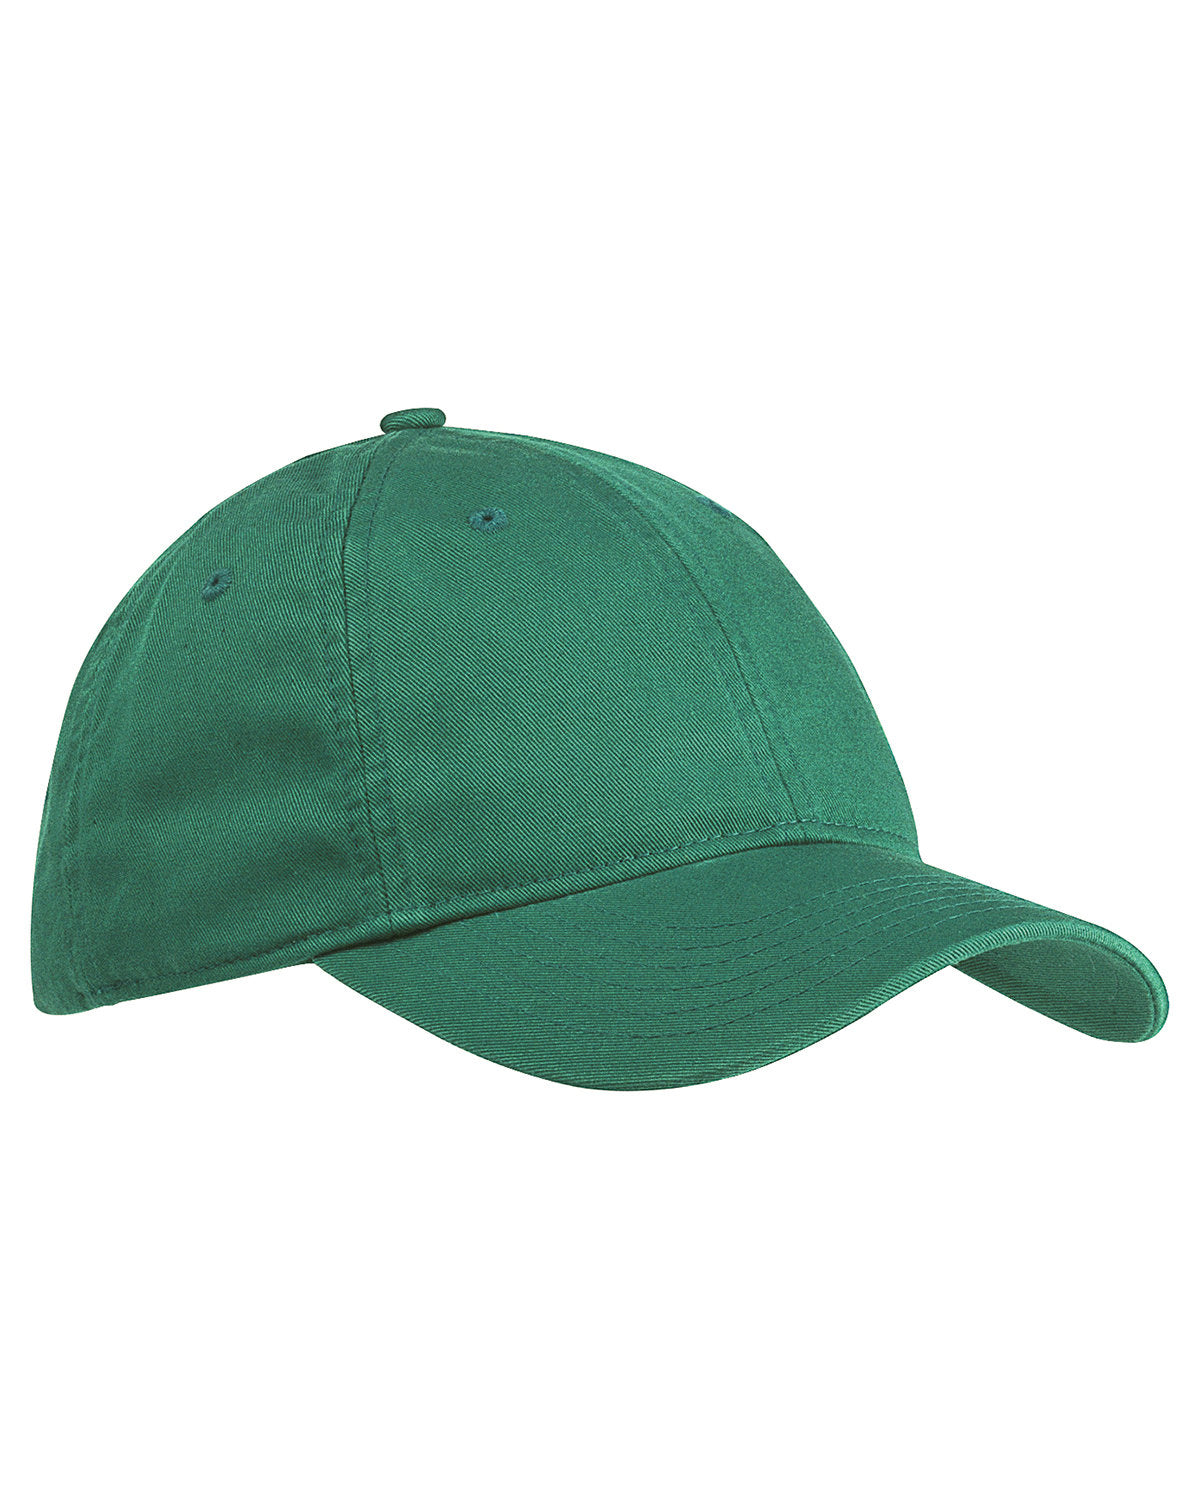 Customizable Econscious Organic Cotton Unstructured Baseball Hat in green.